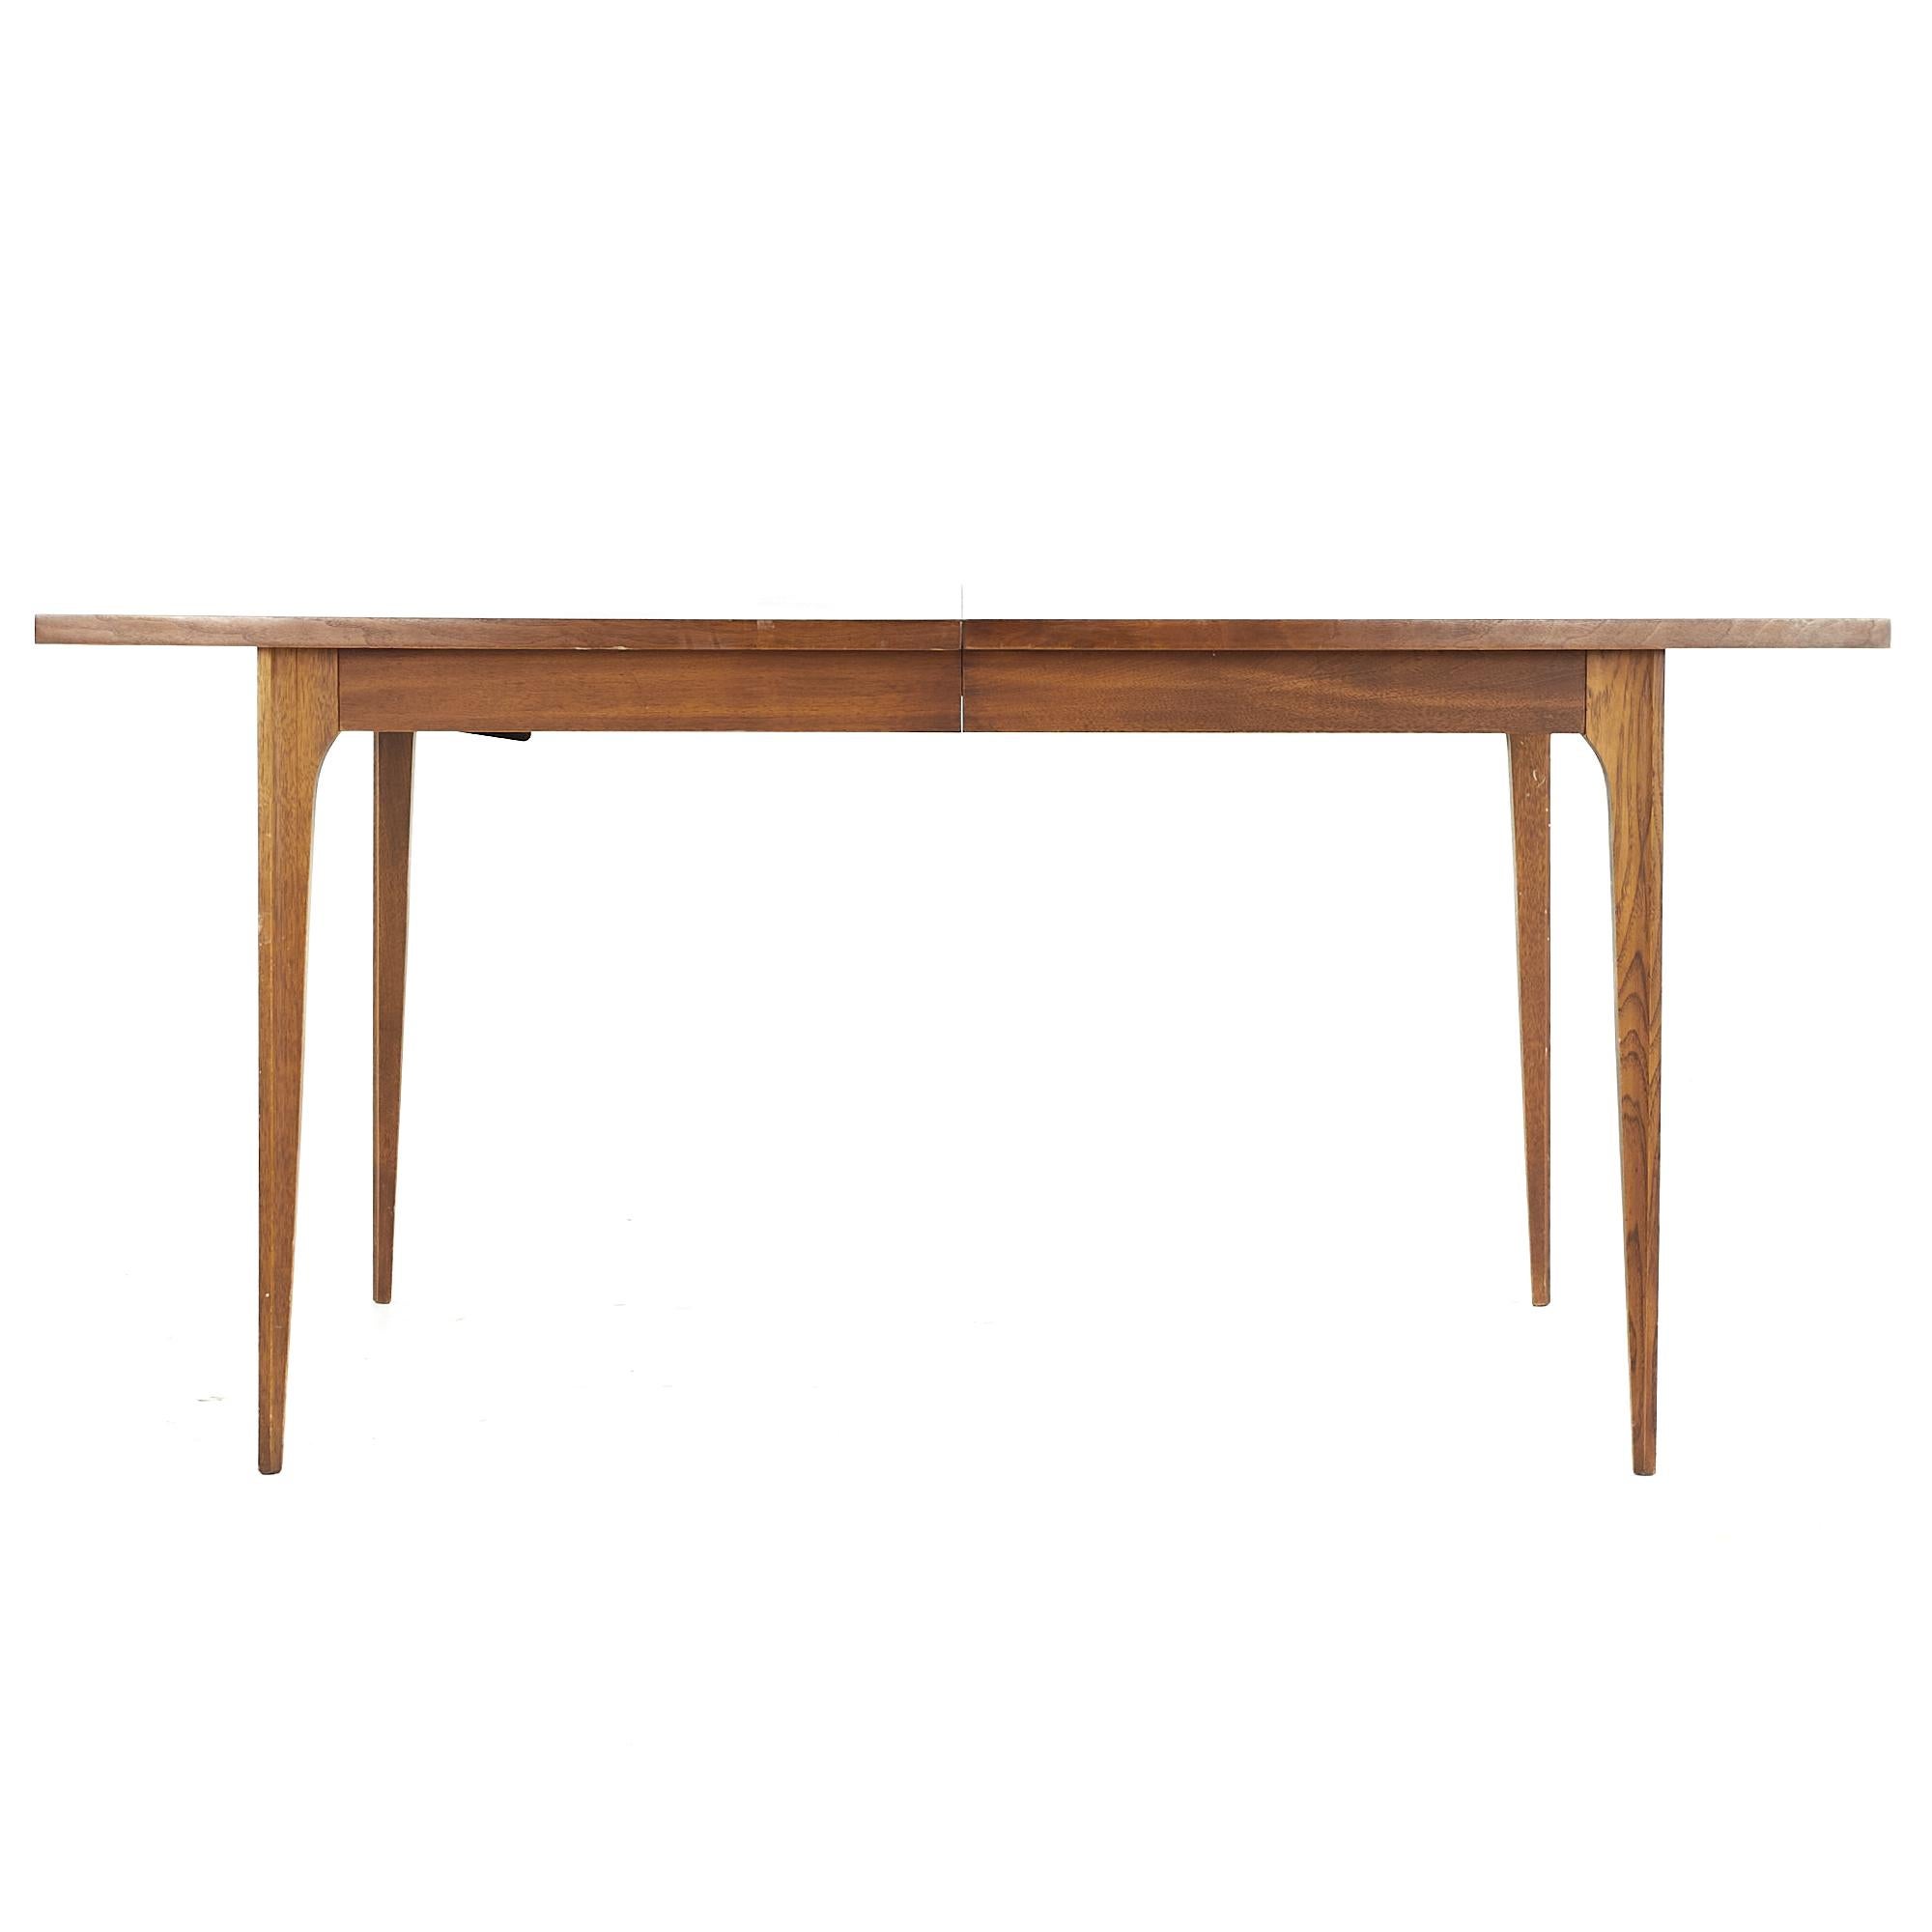 Broyhill Brasilia midcentury walnut dining table with 1 leaf.

This table measures: 66 wide x 40 deep x 29.75 high, the leaf measures 12 inches wide, making a maximum table width of 78 inches when the leaf is used.

All pieces of furniture can